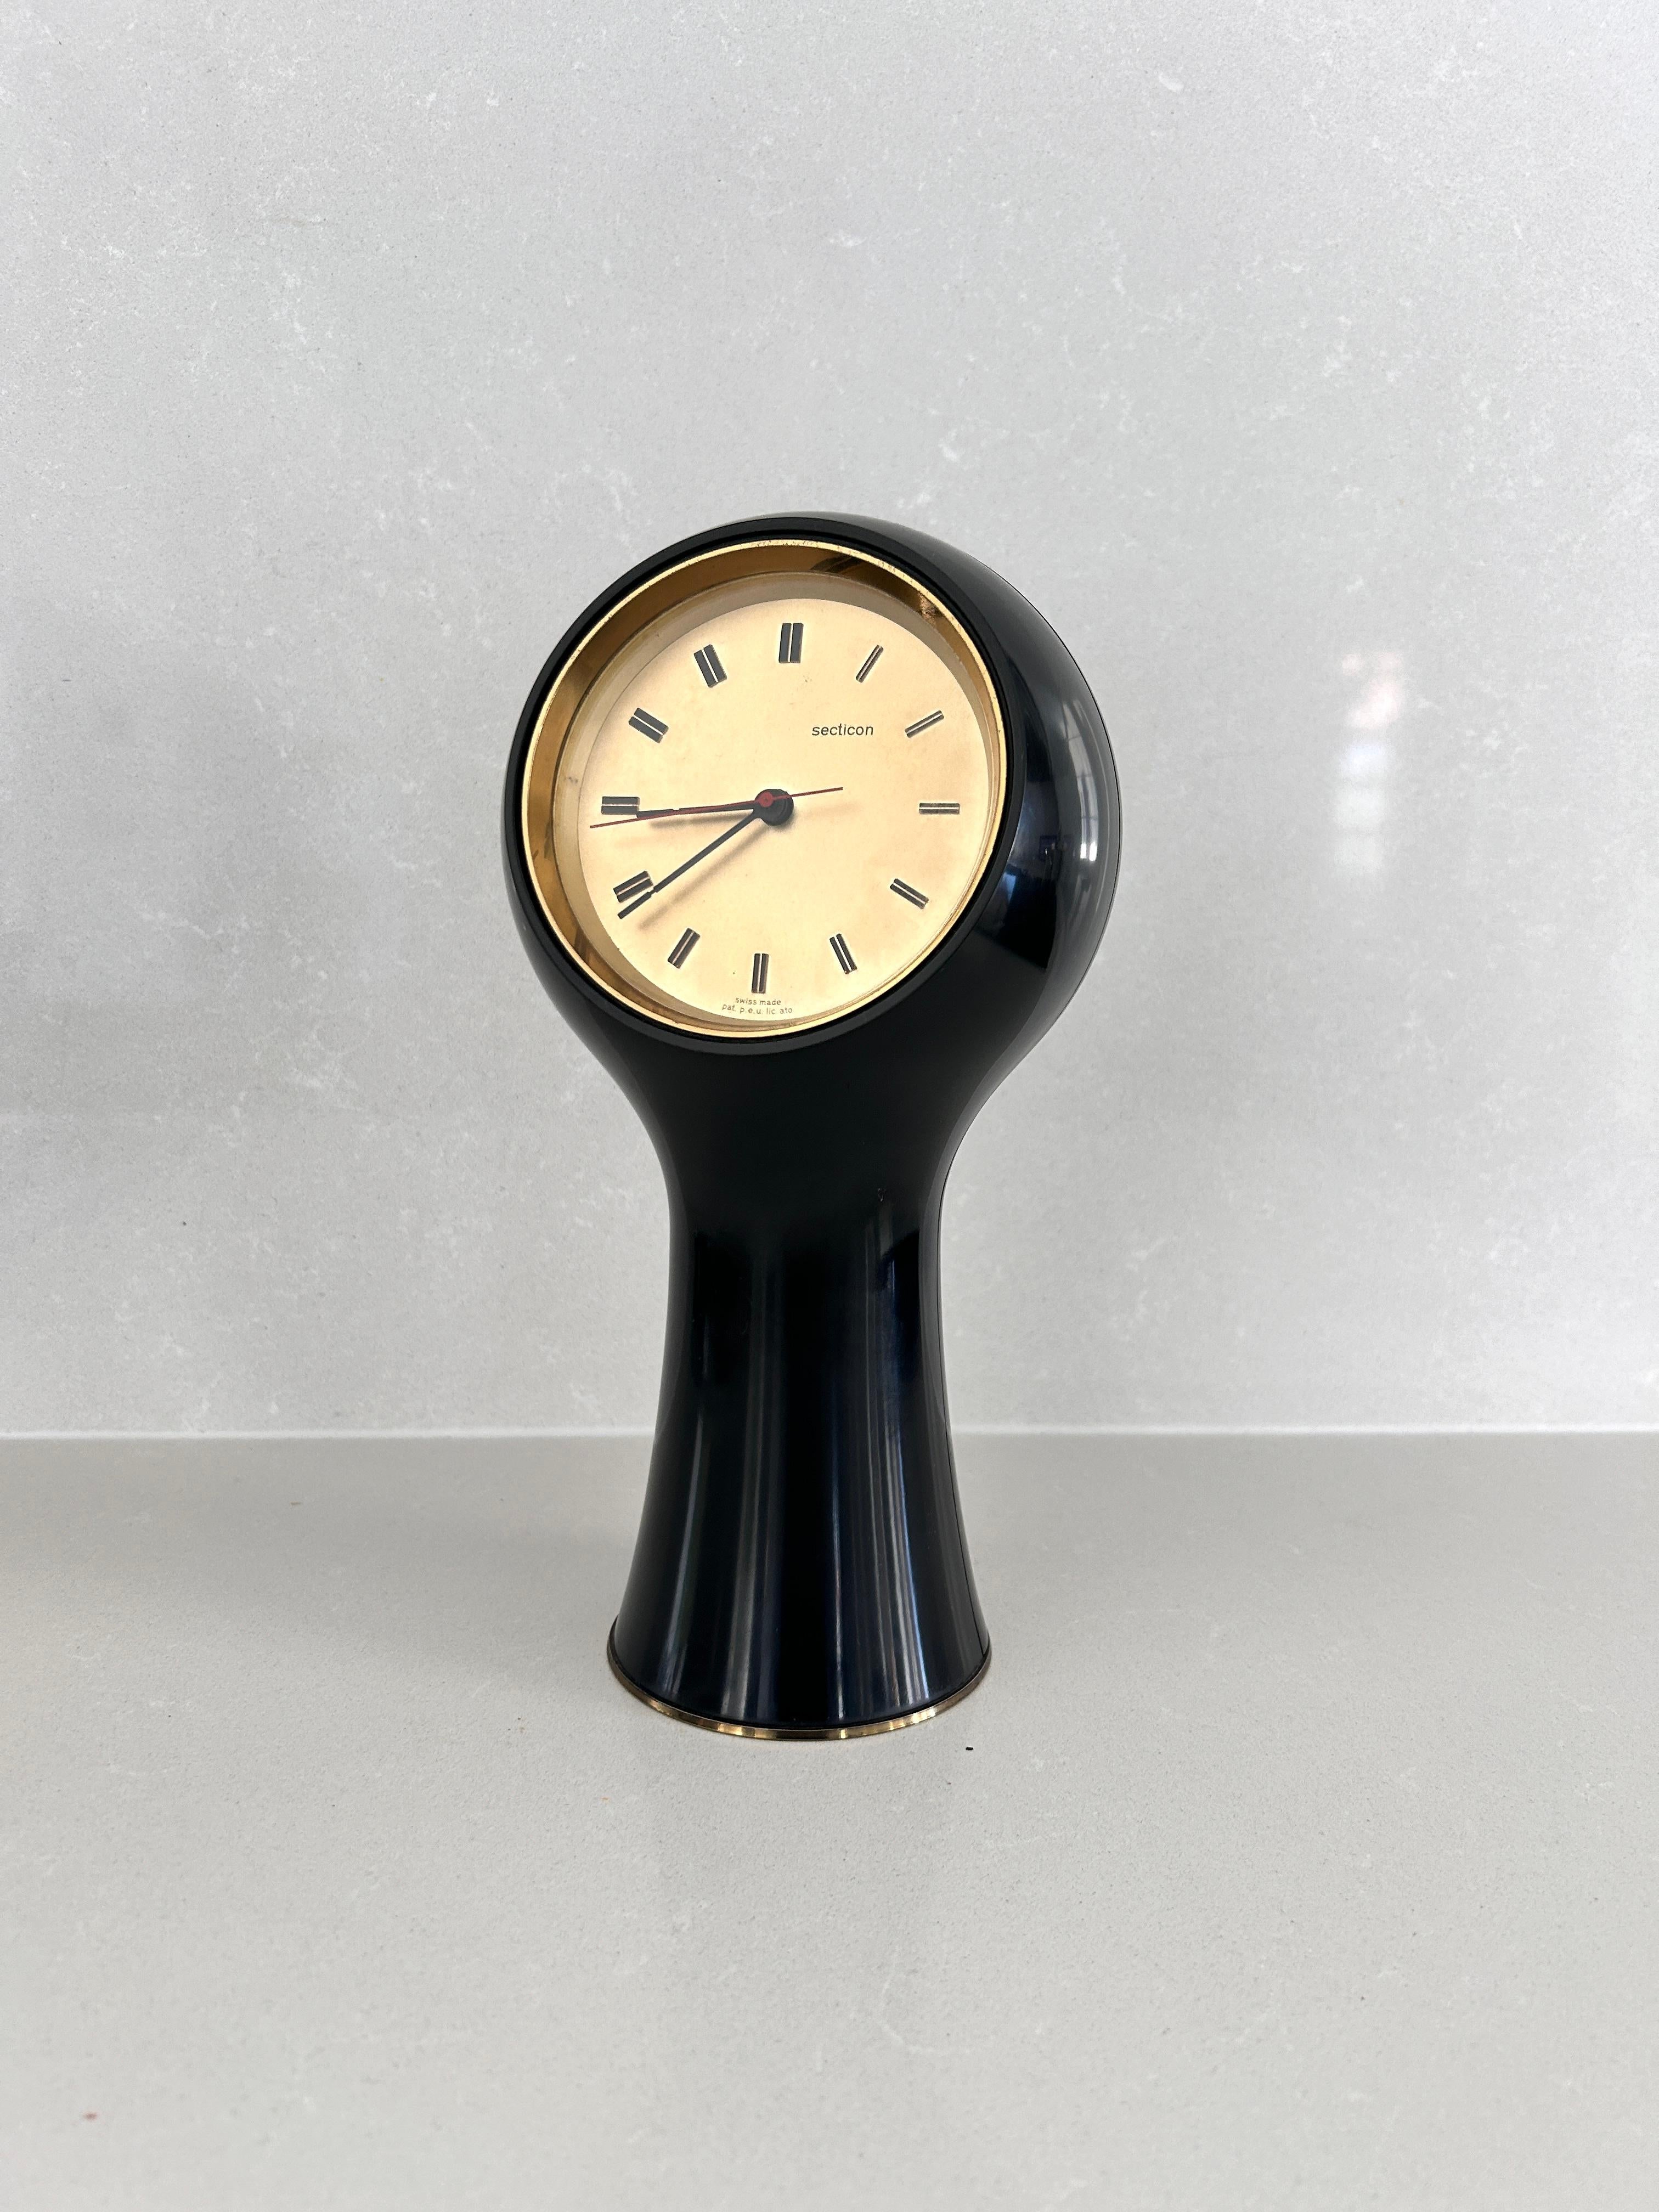 Table clock designed by Angelo Mangiarotti and Bruno Morassutti in 1956 for the Swiss company Le Porte-Echappement Universel.  

Black plastic frame, battery-operated movement.